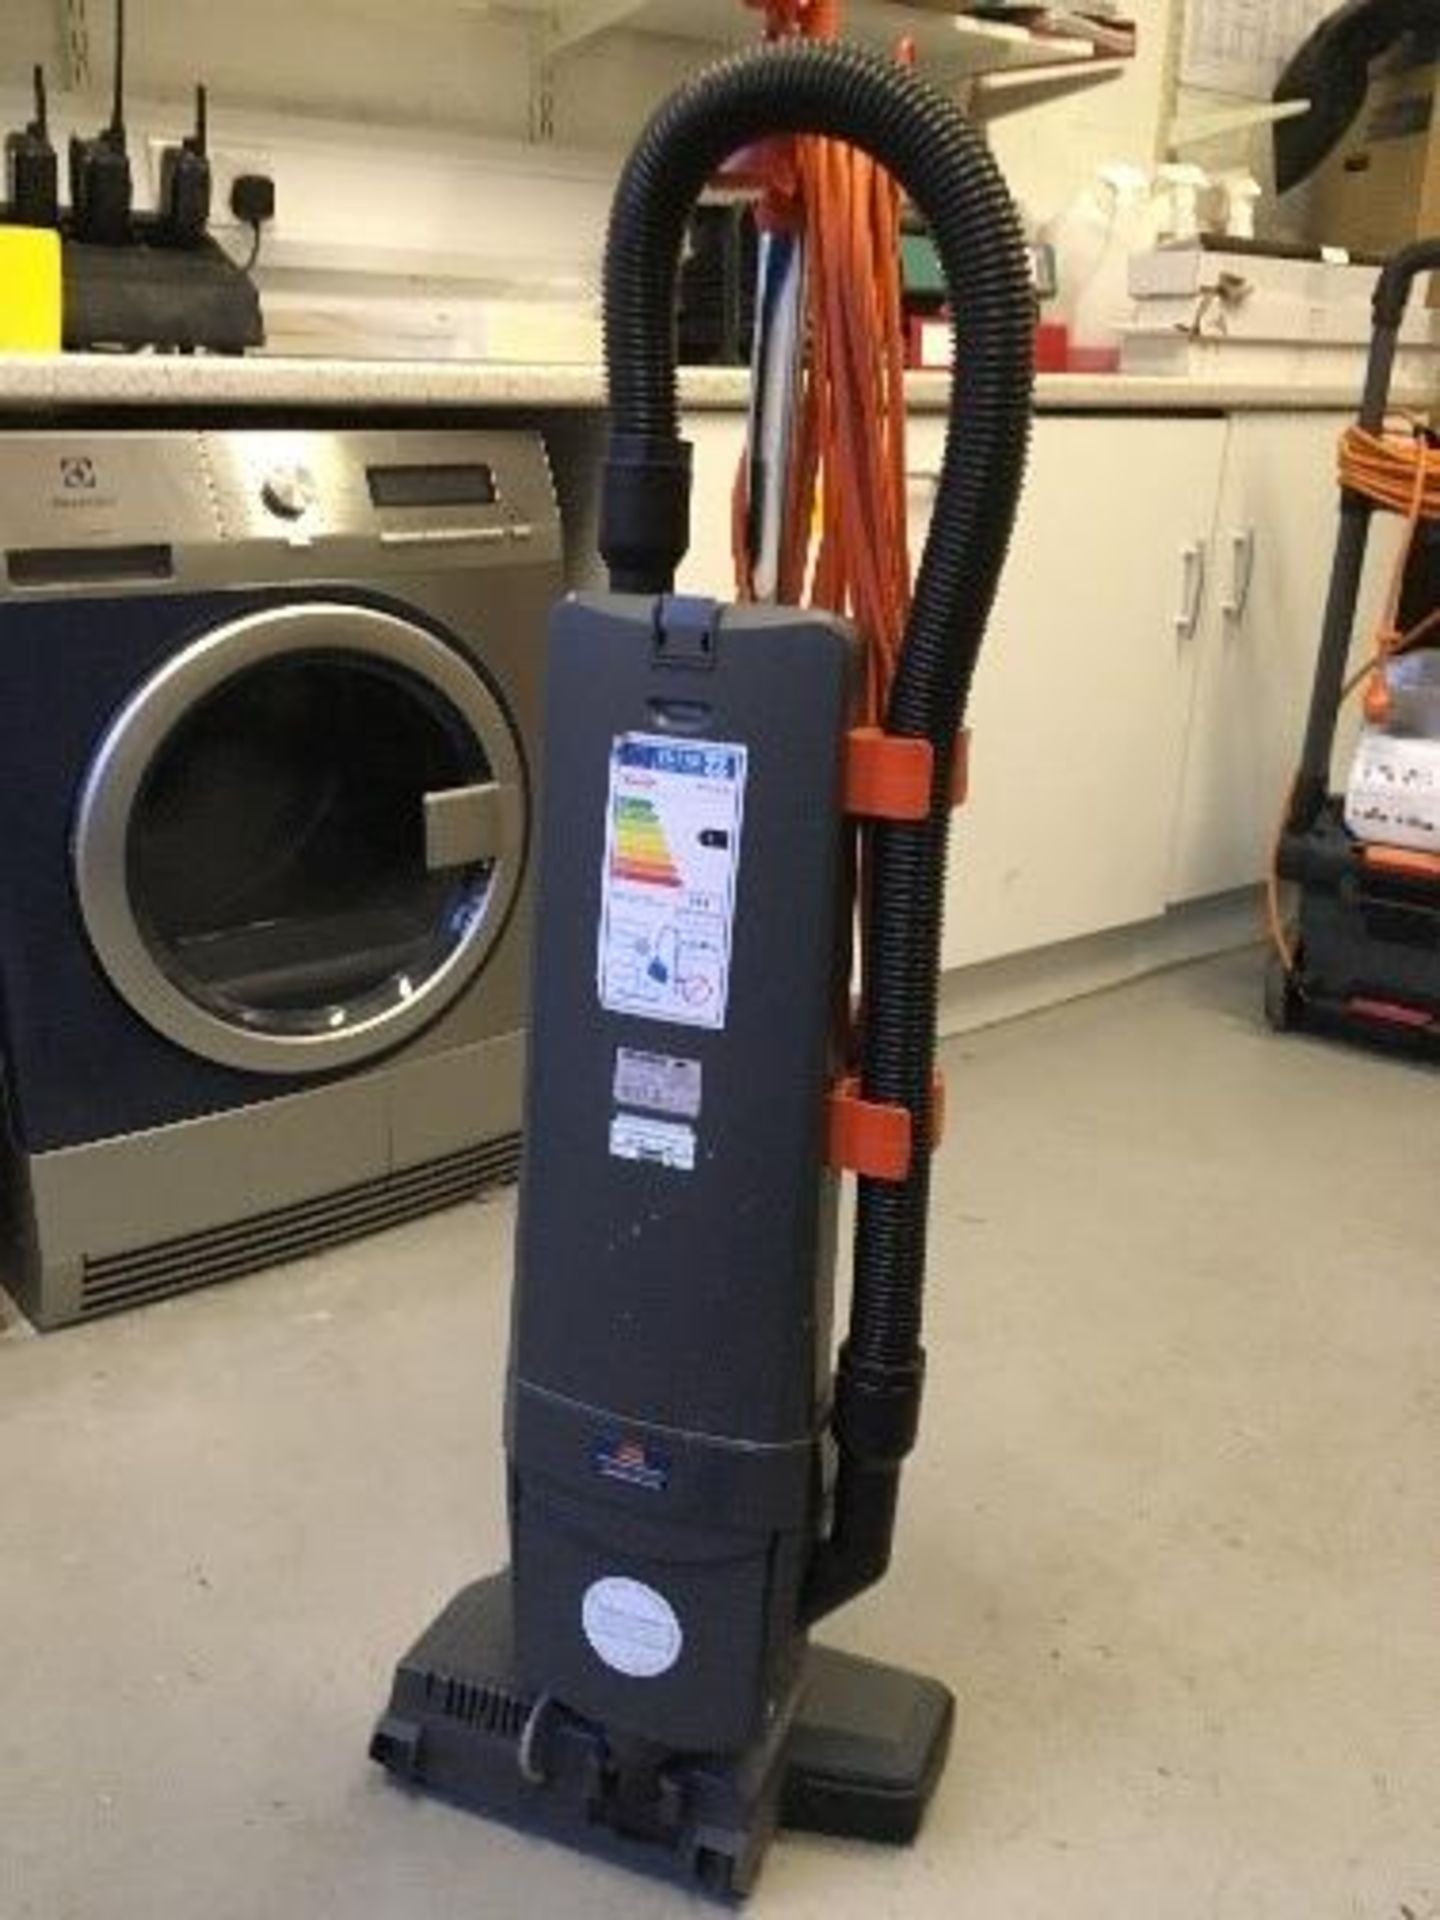 Vax Commercial Cleaning Equipment VCU-03U